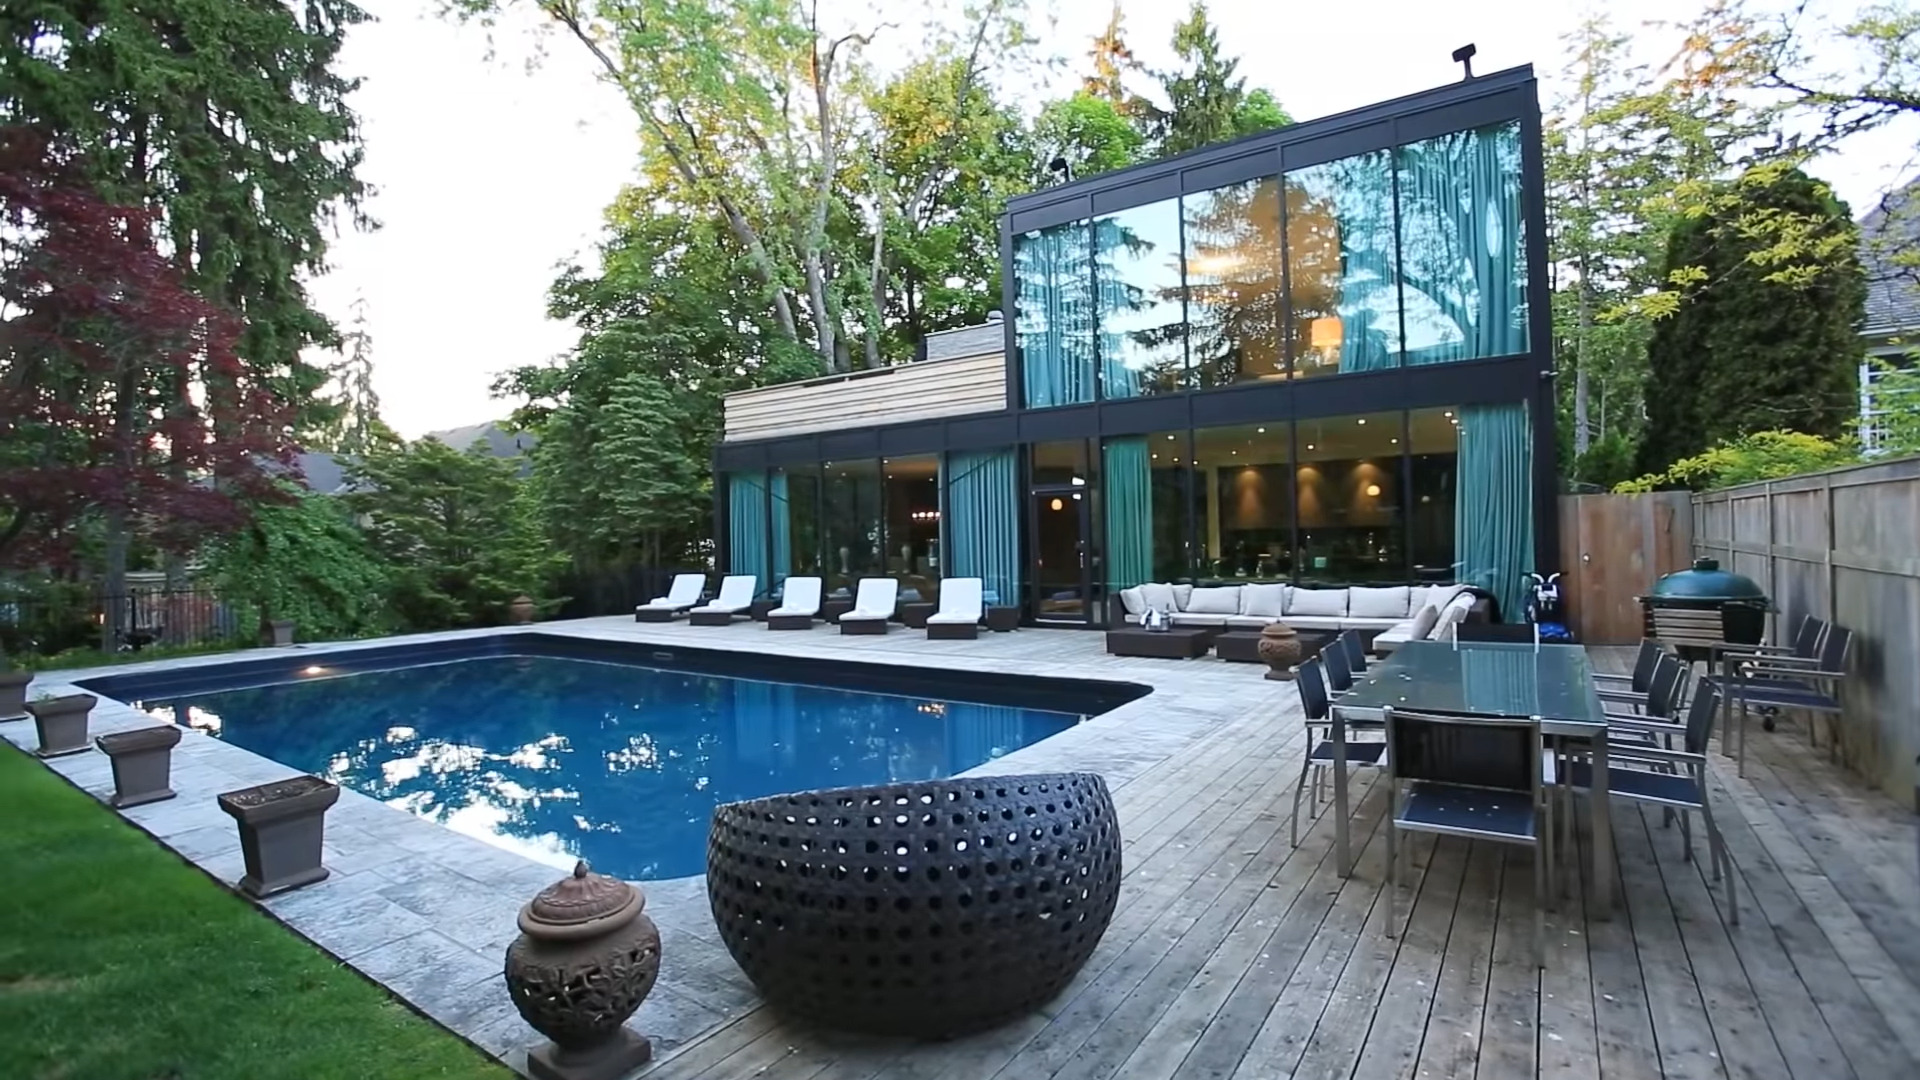 This black modern home has a flat roof with rooftop deck and walls of glass.